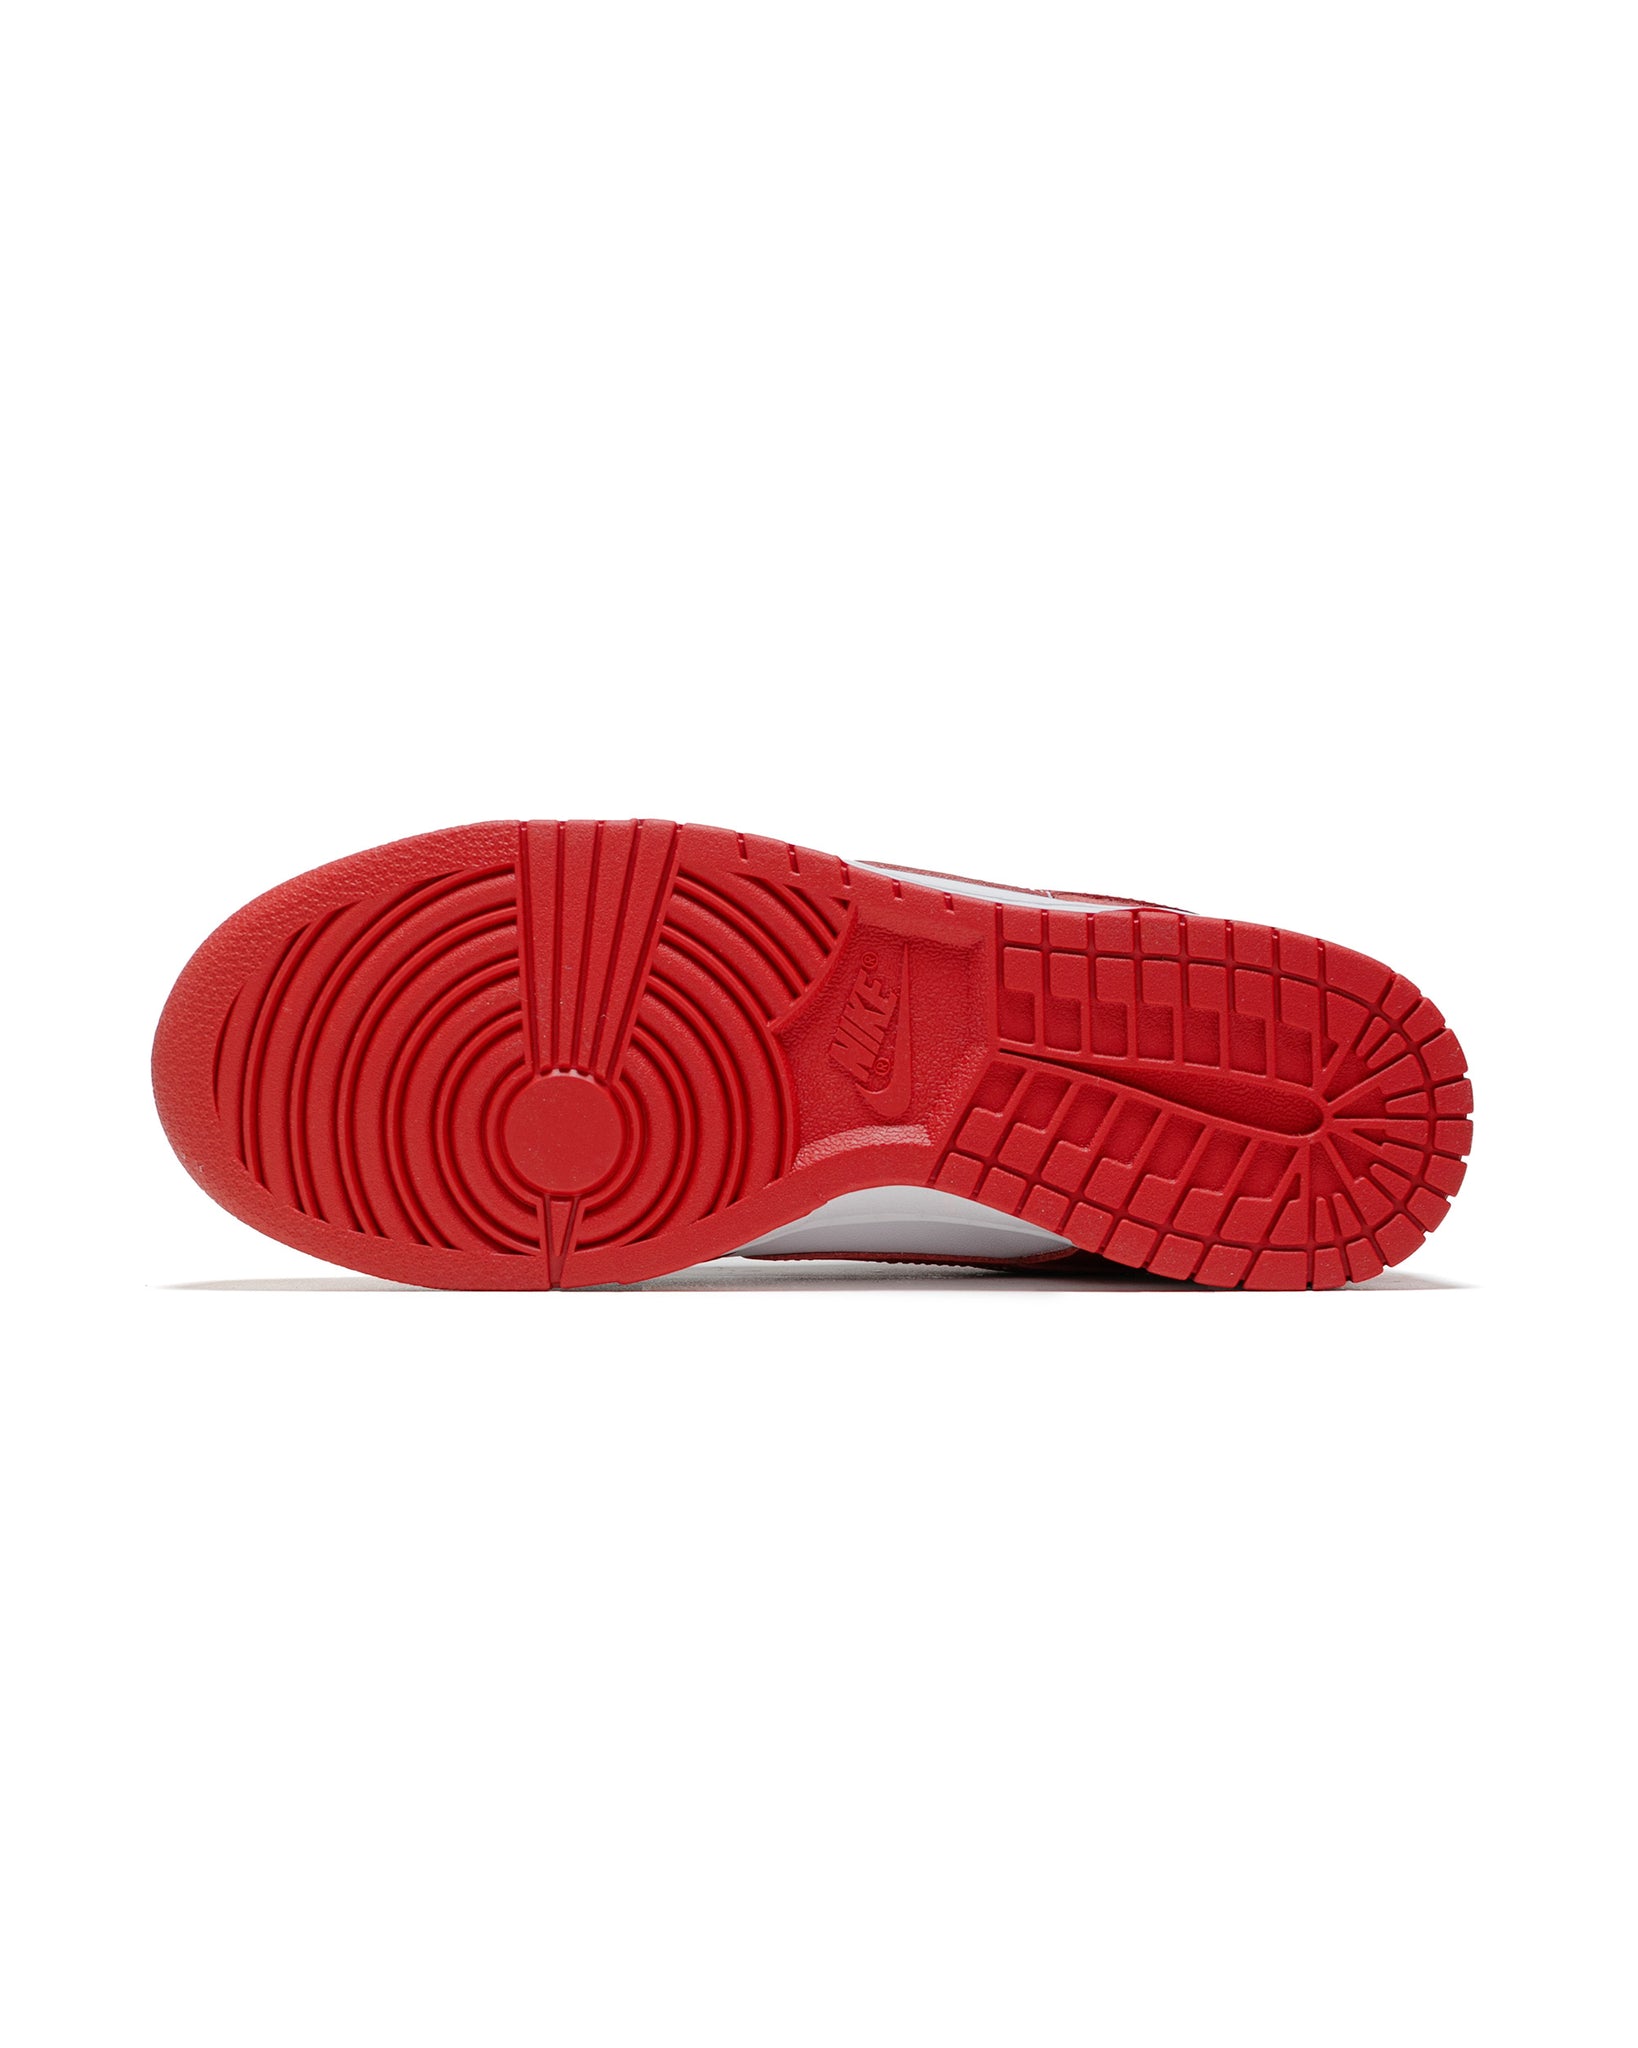 Nike Dunk Low Retro Gym Red/White sole